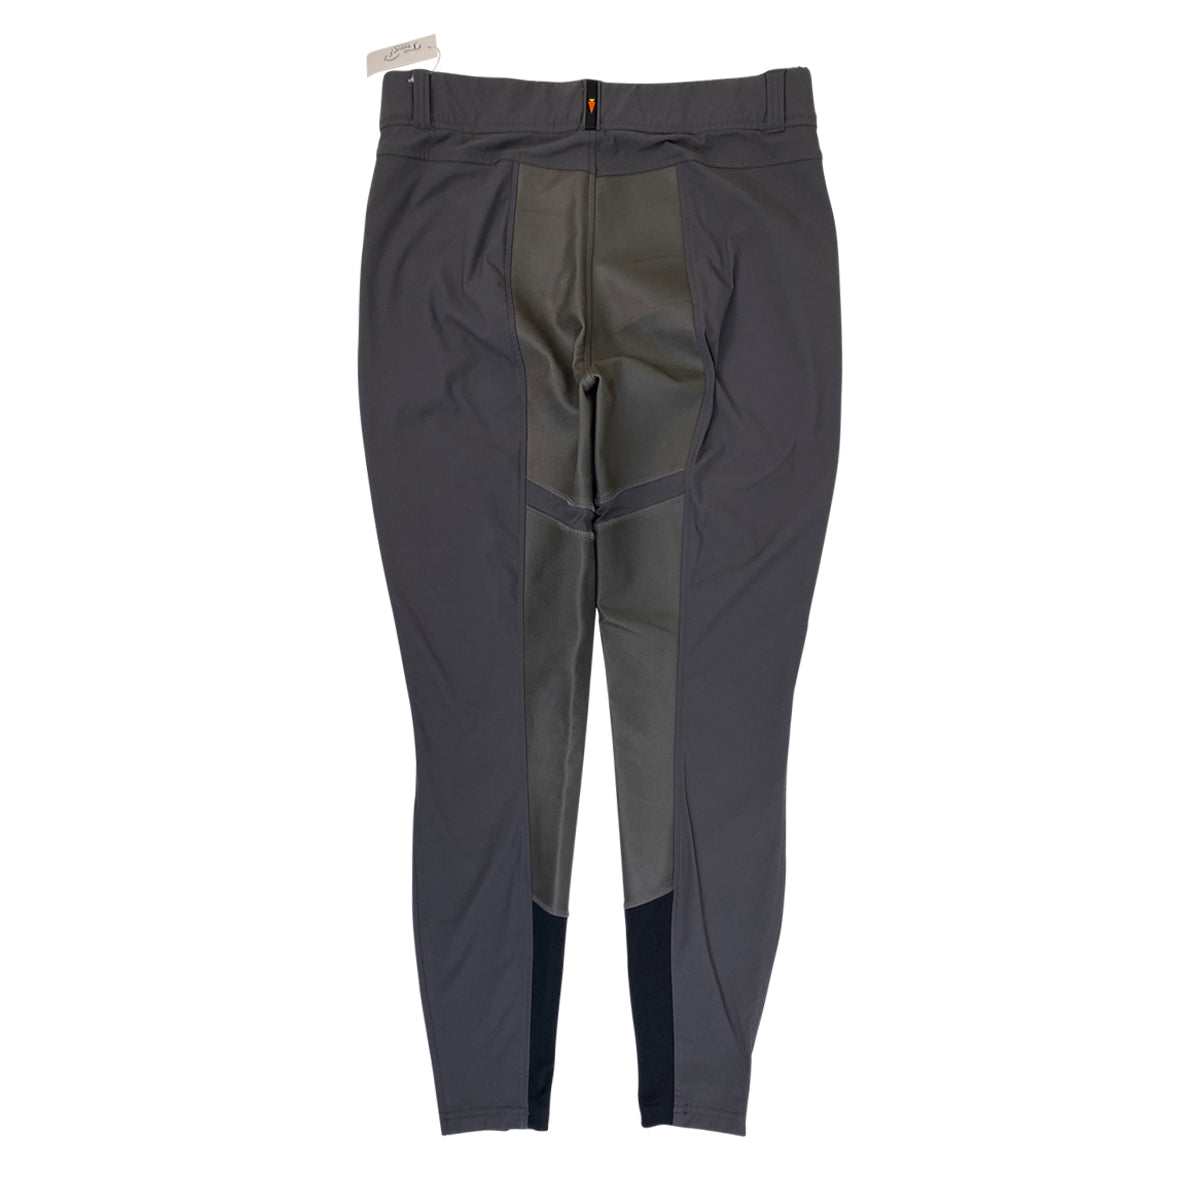 Kerrits Crossover II Full Seat Breeches in Charcoal